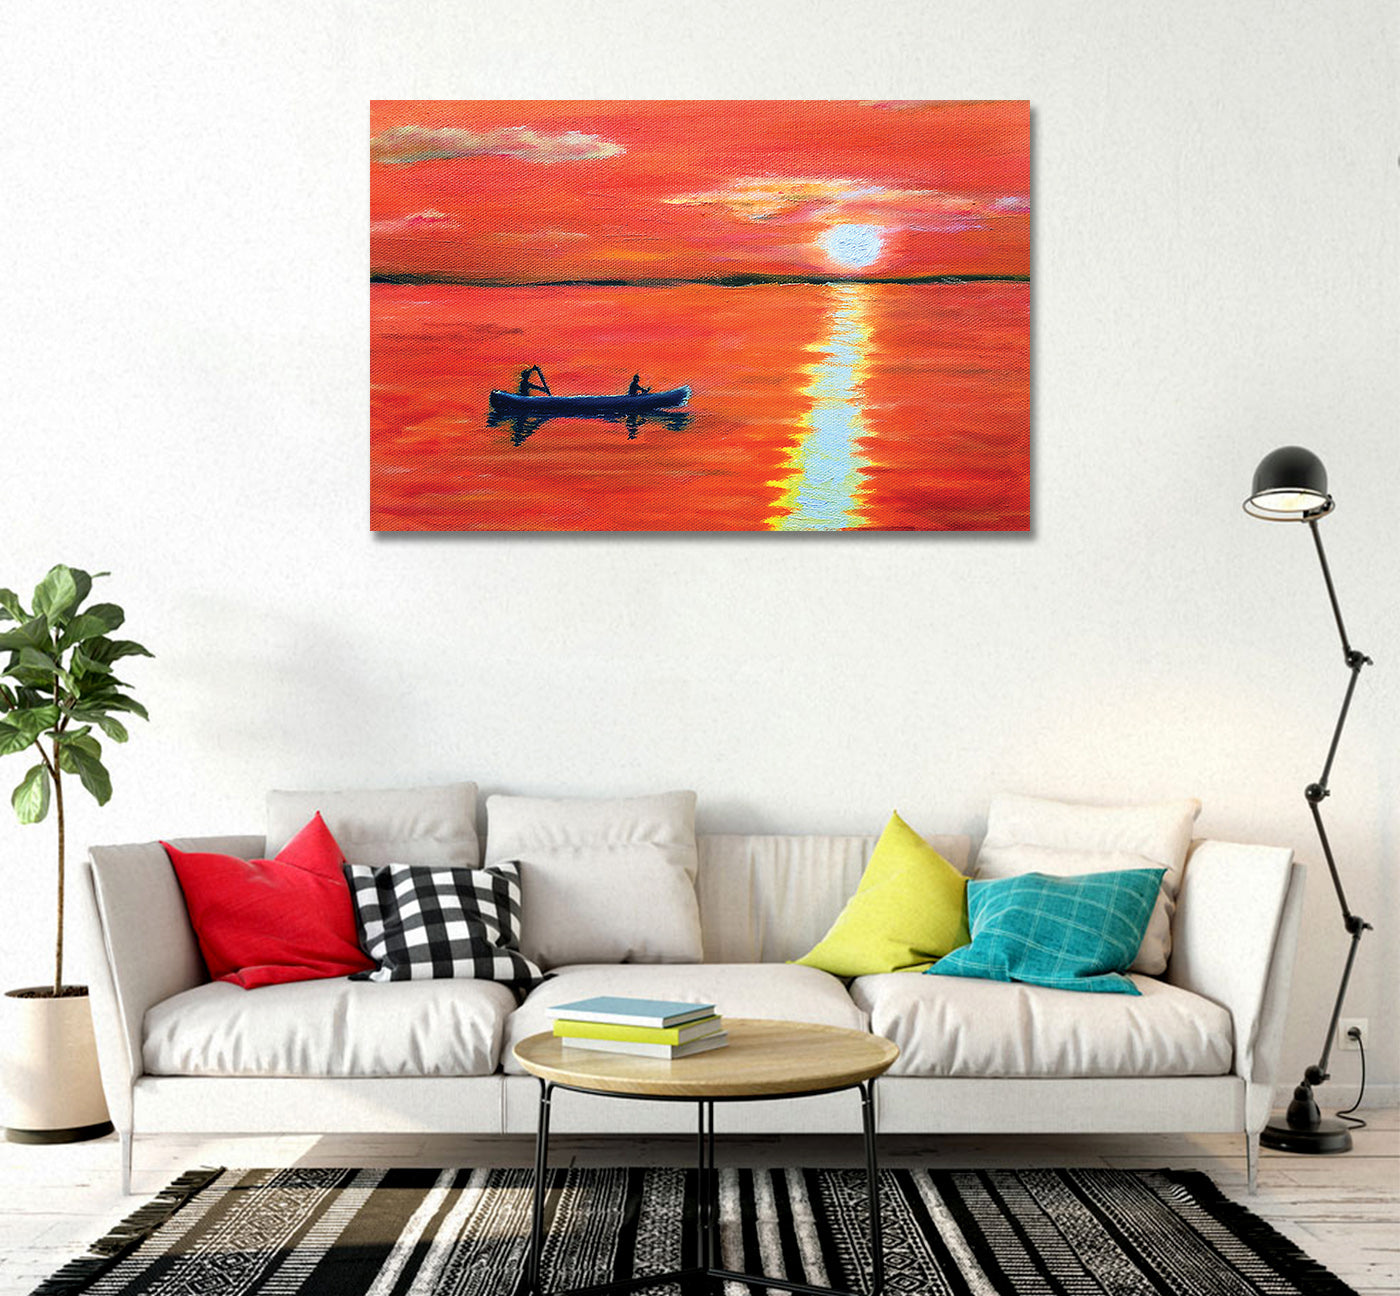 Boating in River Ganga - Unframed Canvas Painting